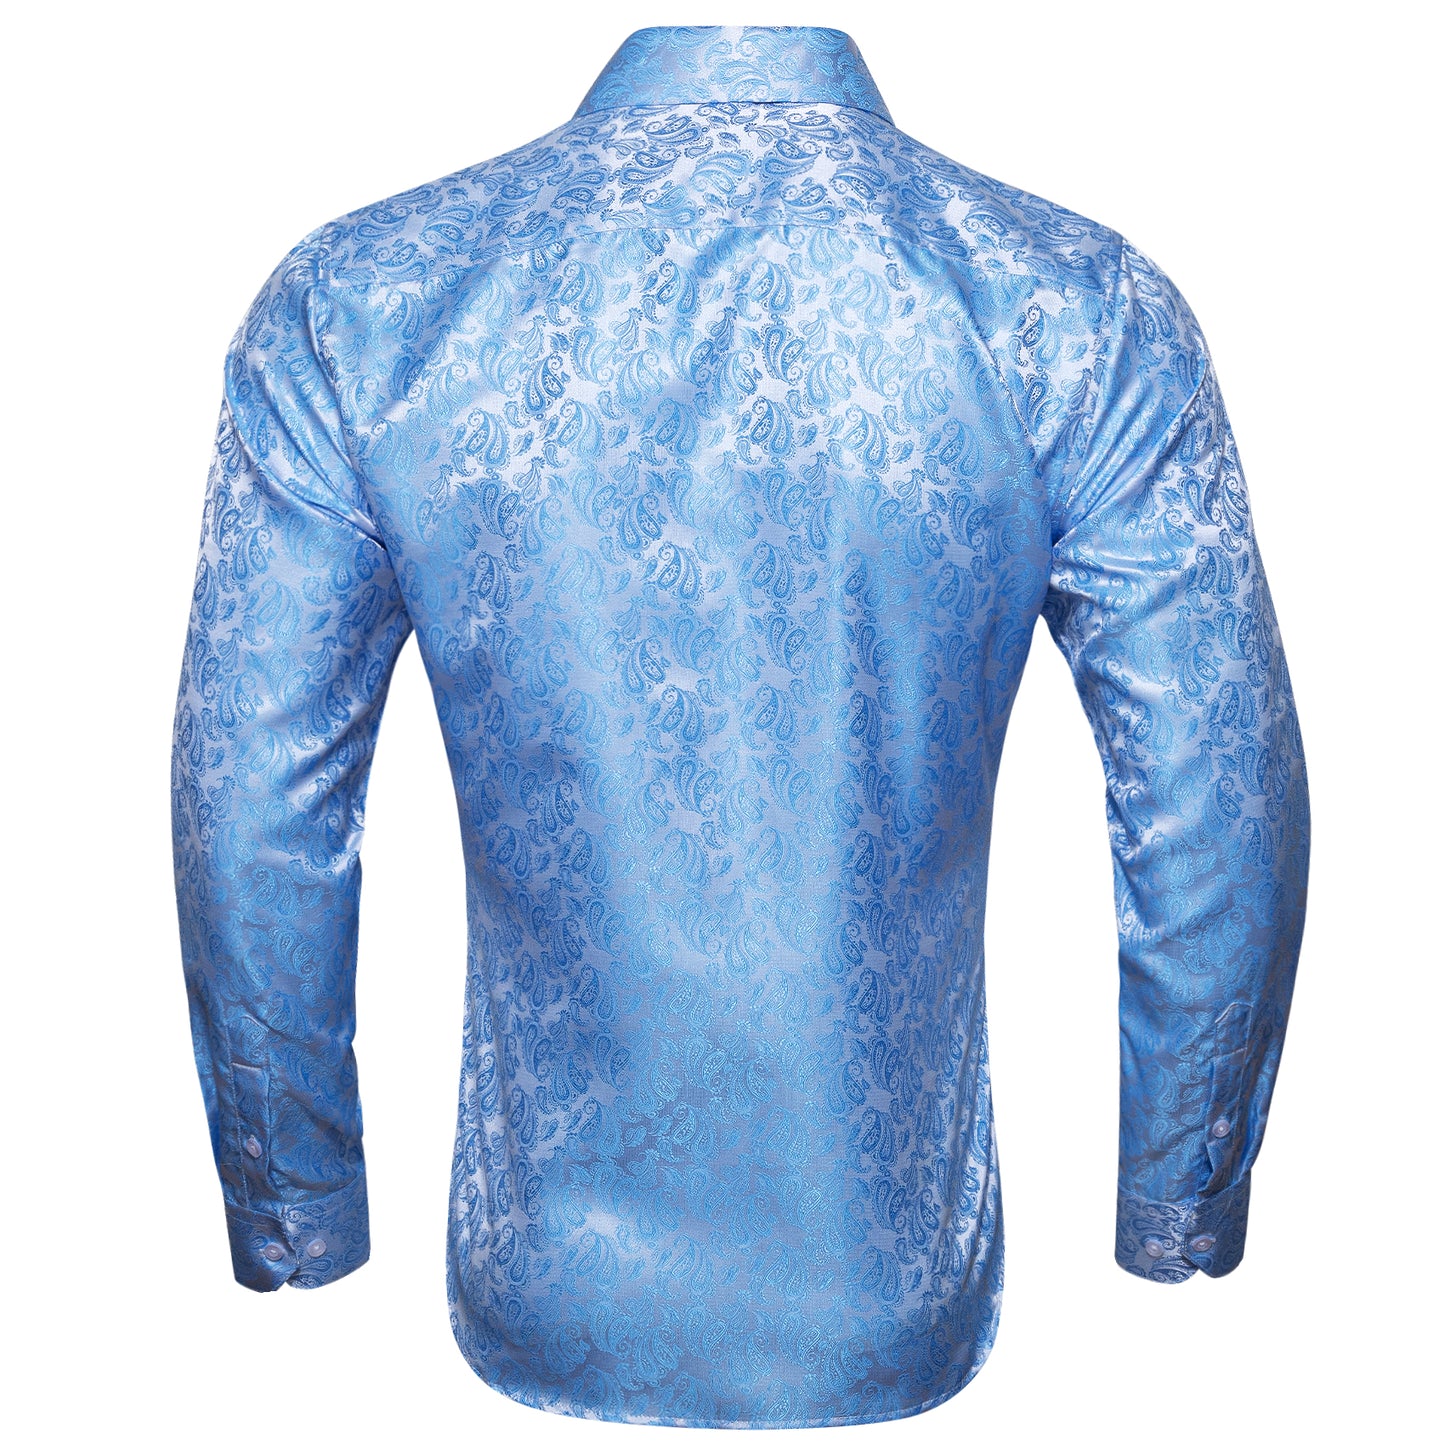 Novelty Silky Shirt - Icy Nuts